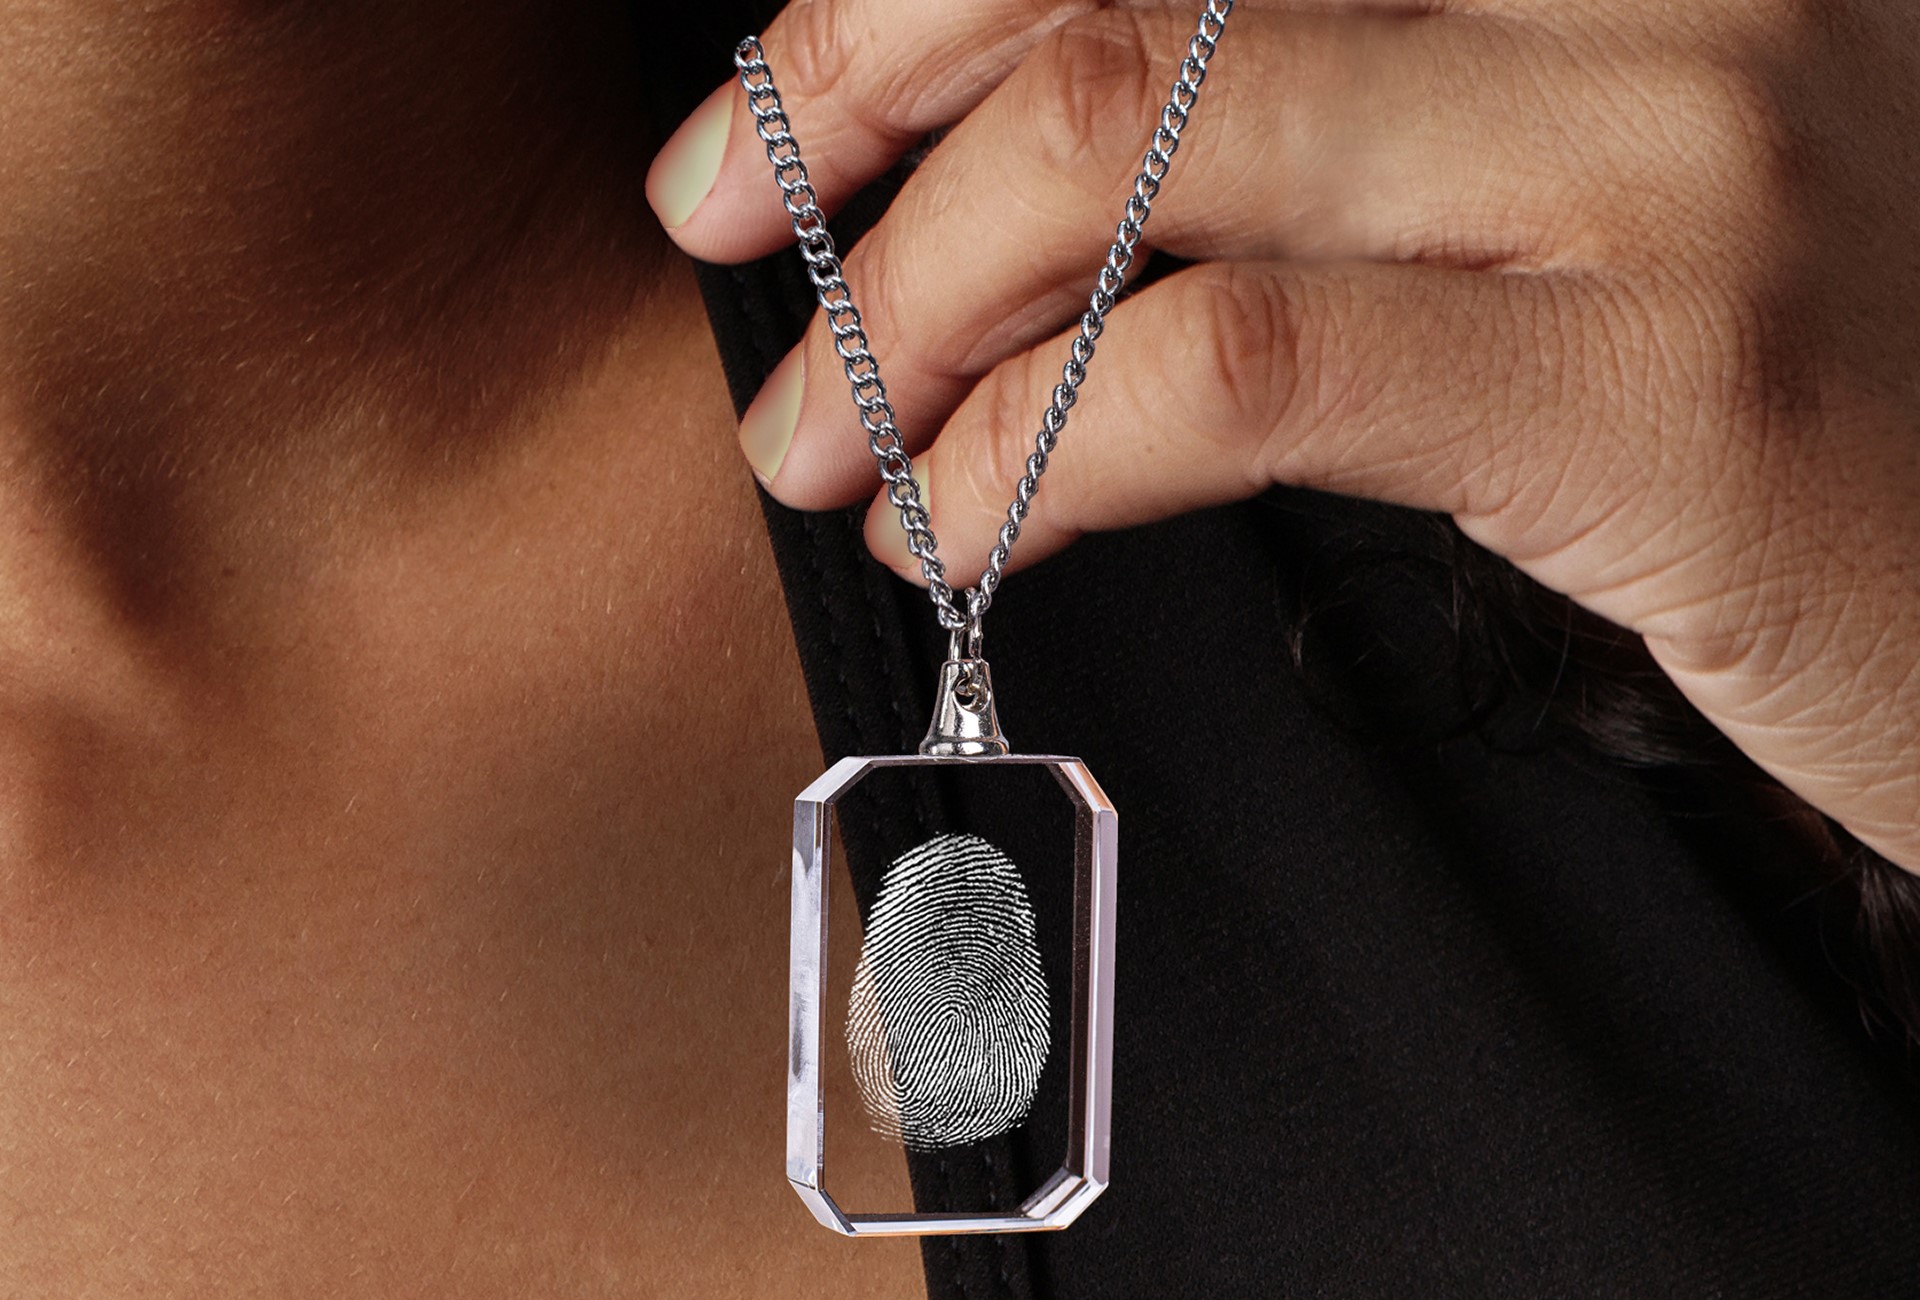 A woman shows off the engraved fingerprint necklace she got as a gift from a friend.